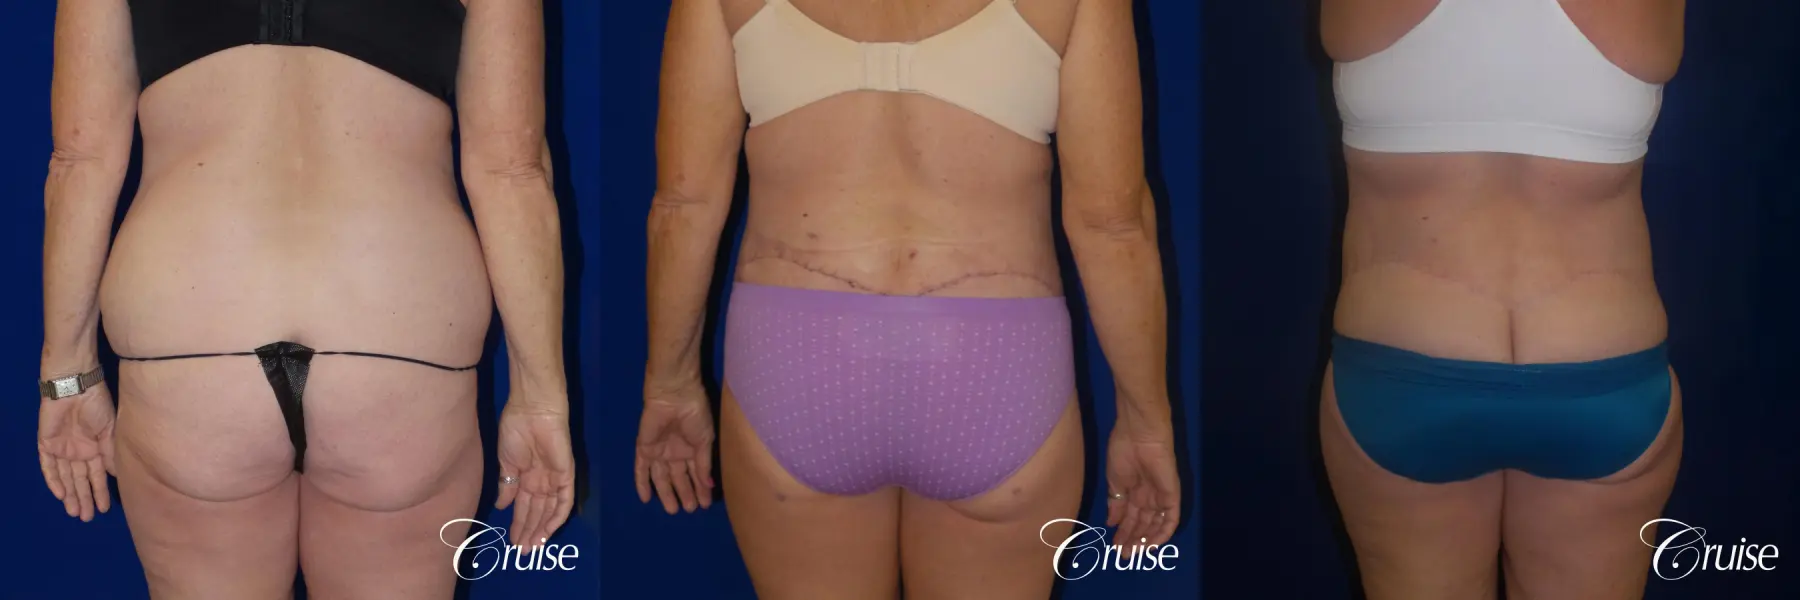 62 Yr Old Female Circumferential Tummy Tuck w/BBL & Liposuction - Before and After 6